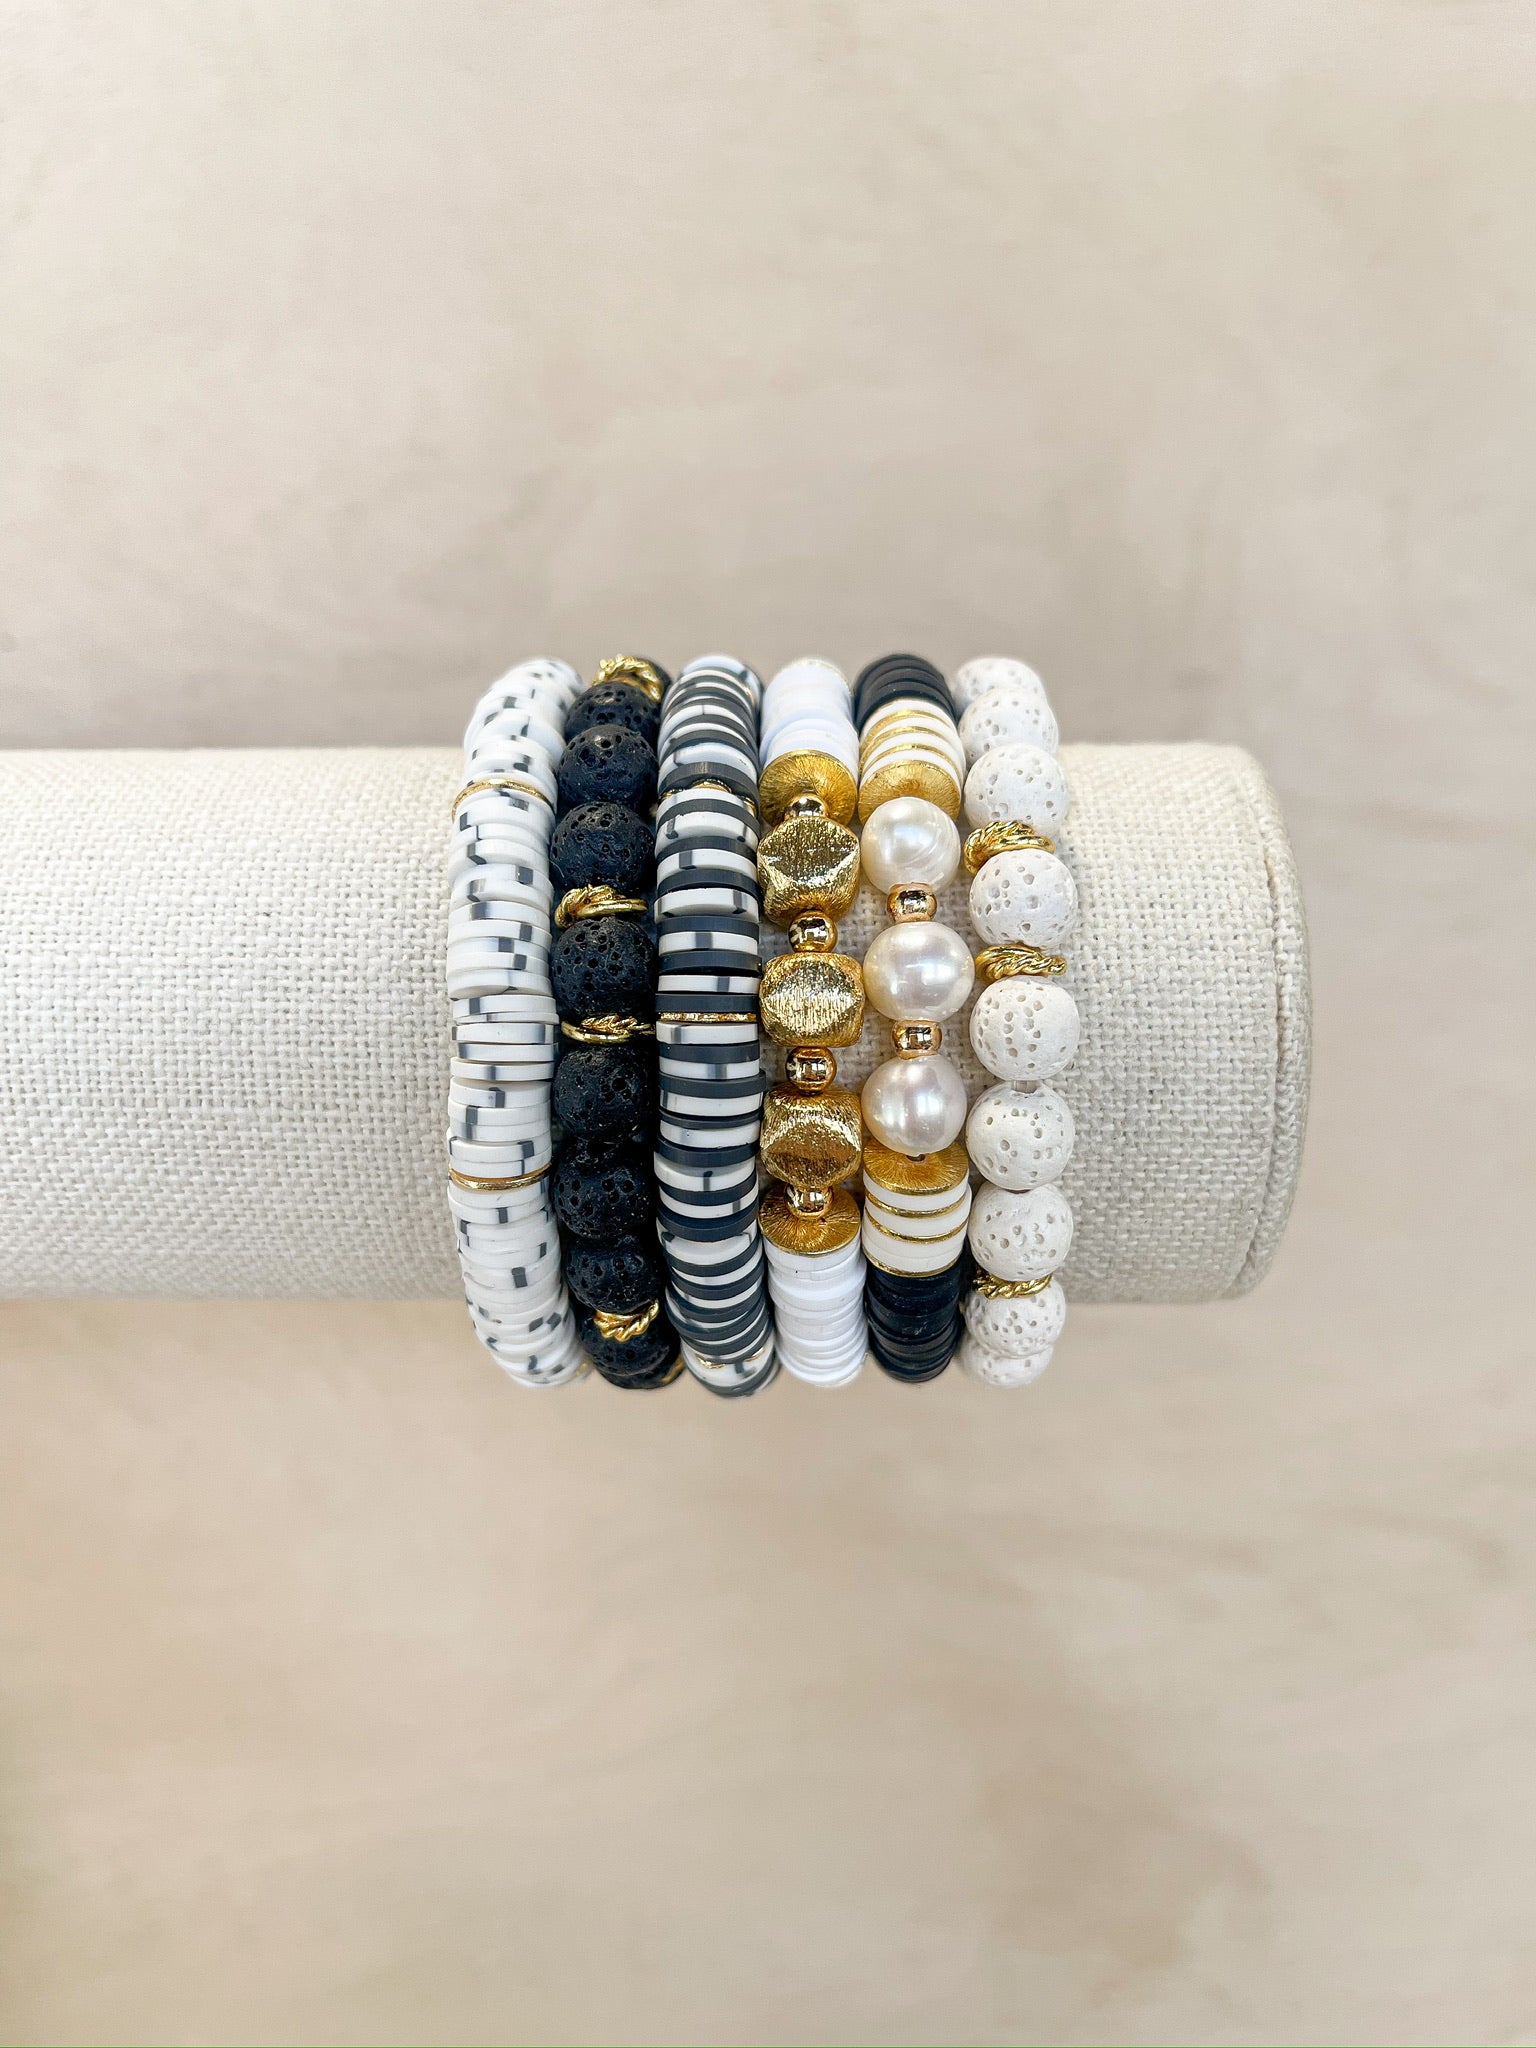 black coral beads, stone beads, separated by gold beads, handmade, stacked with other callie bracelets